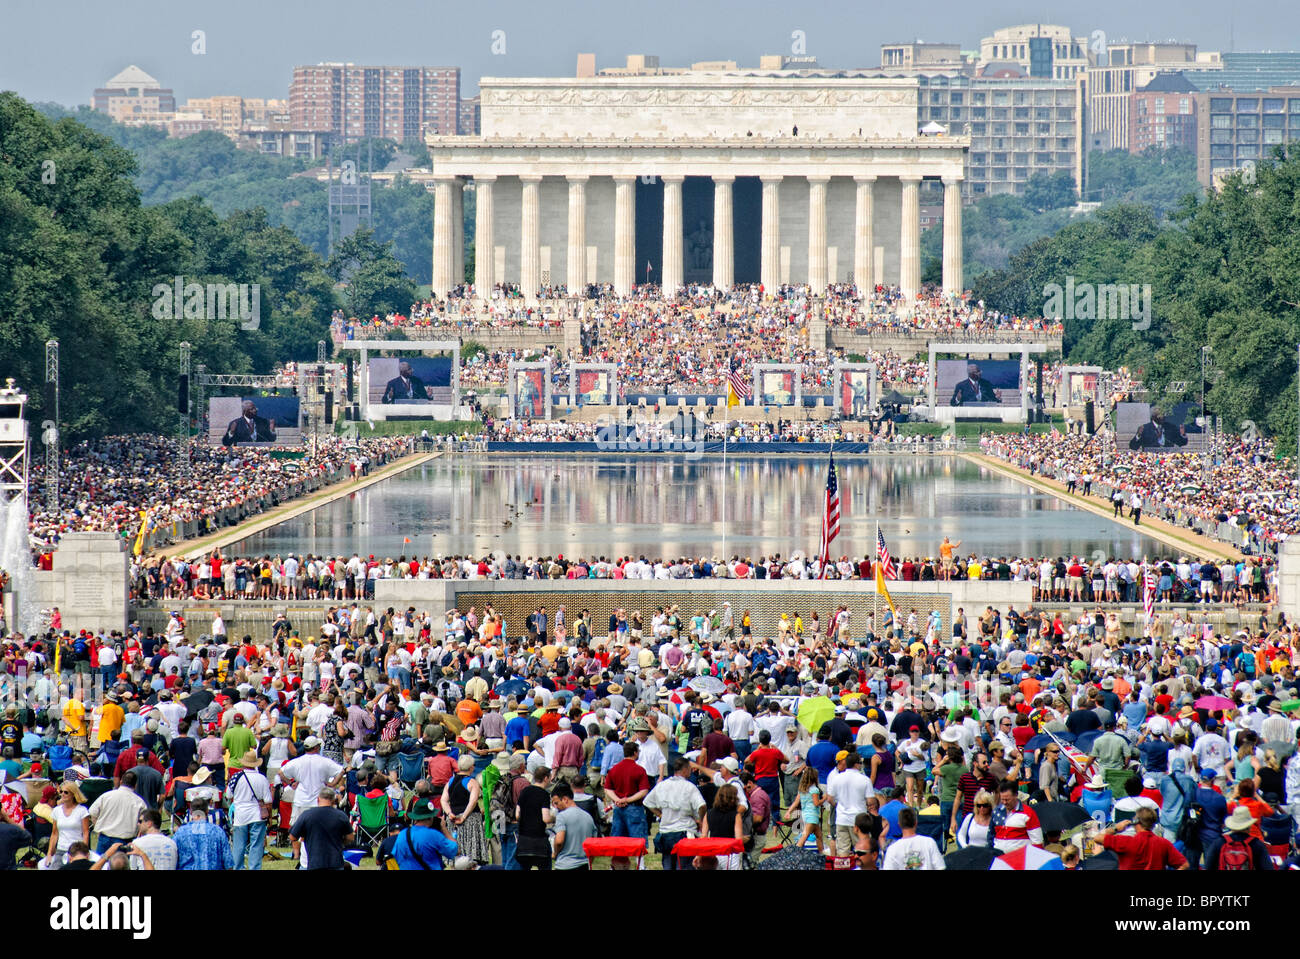 WASHINGTON DC, USA - Crowds at the Lincoln Memorial for conservative television commentator Glenn Beck's 'Restoring Honor' rally on the National Mall. Stock Photo